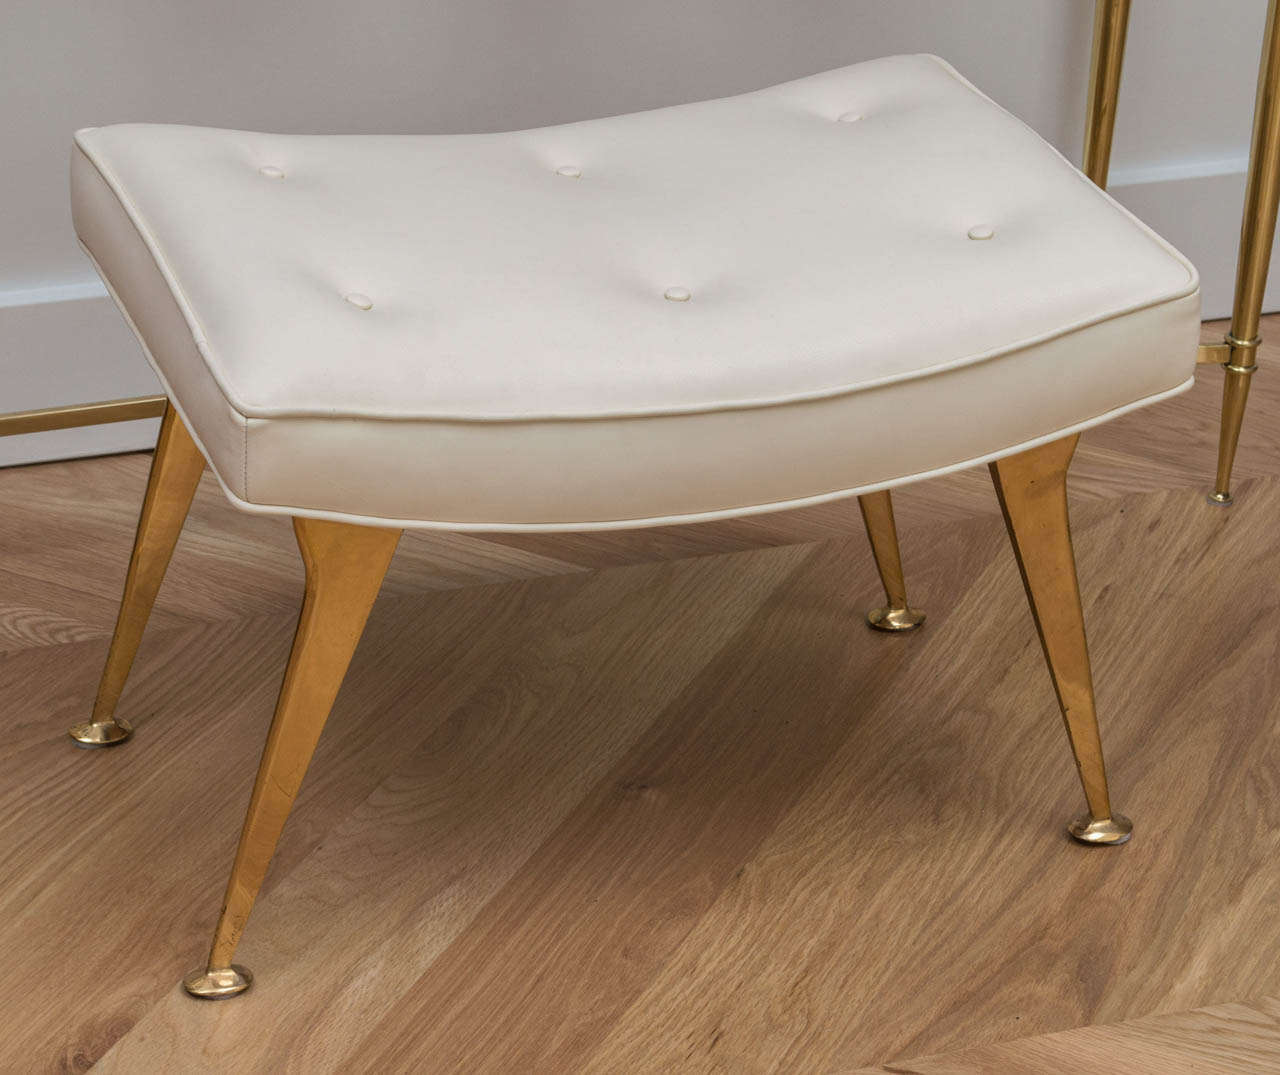 The perfect Italian brass stool in a cream colored leather.